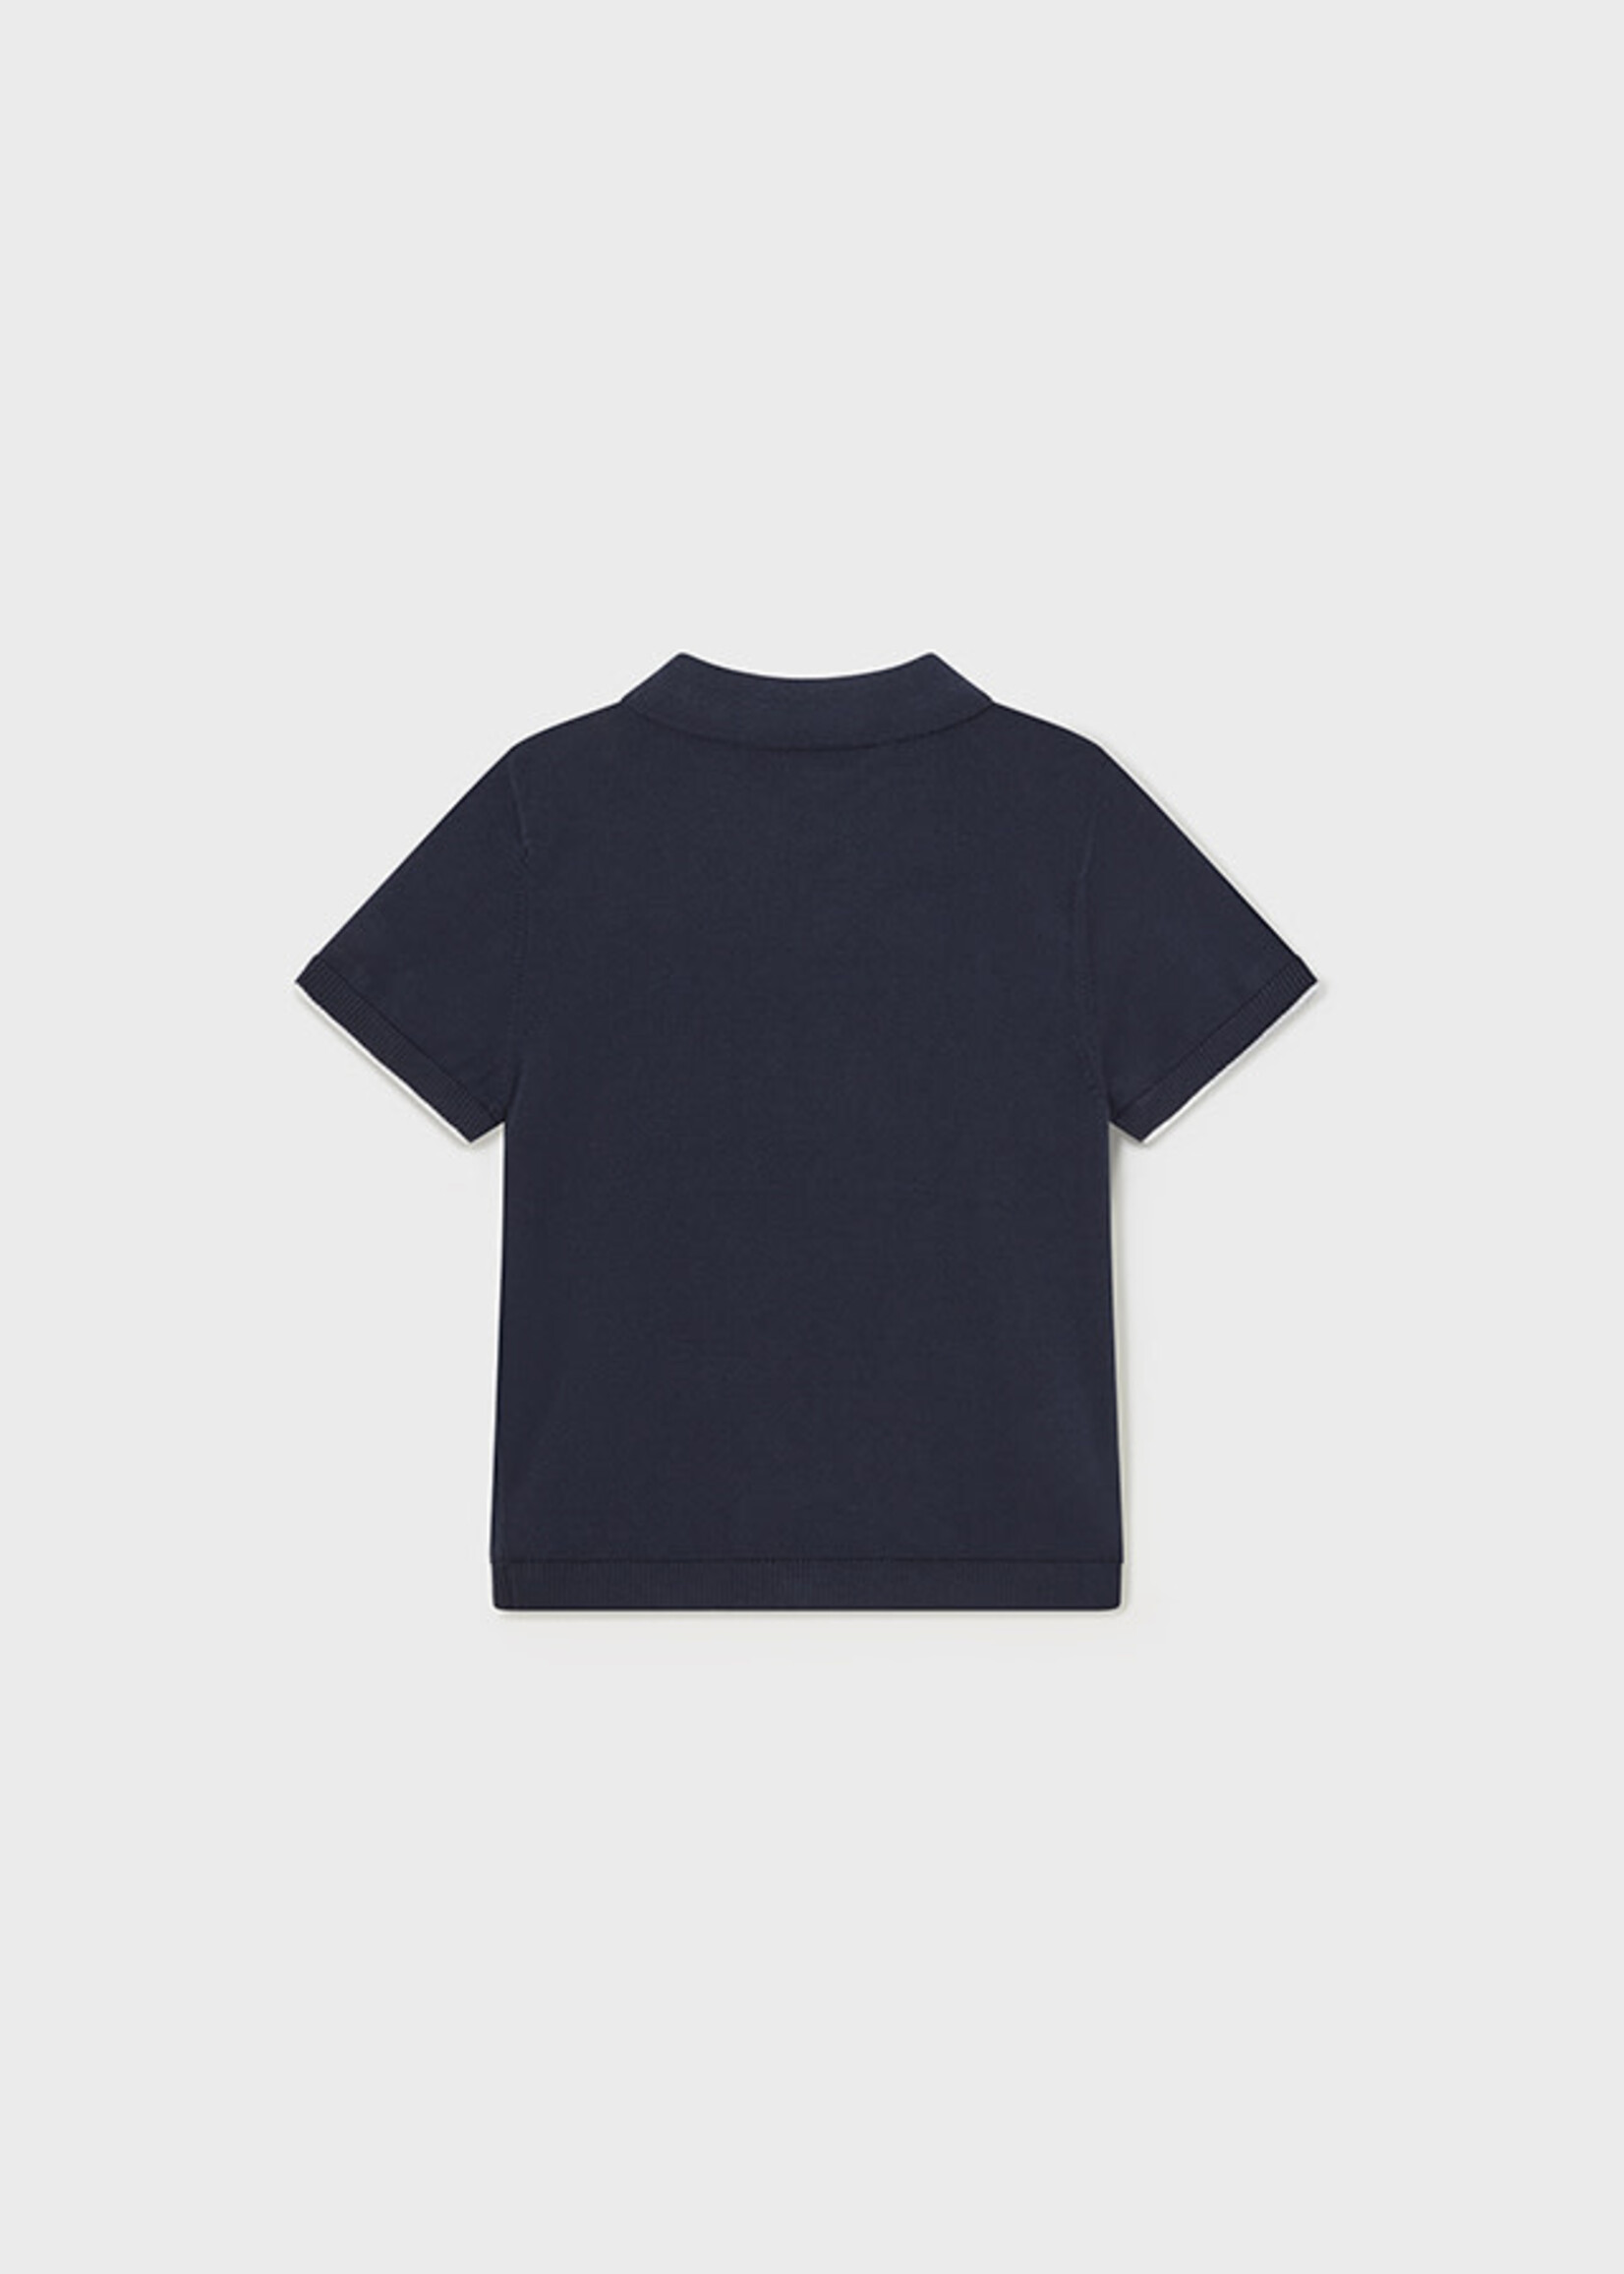 Mayoral Mayoral S/s polo Navy - 24 01105